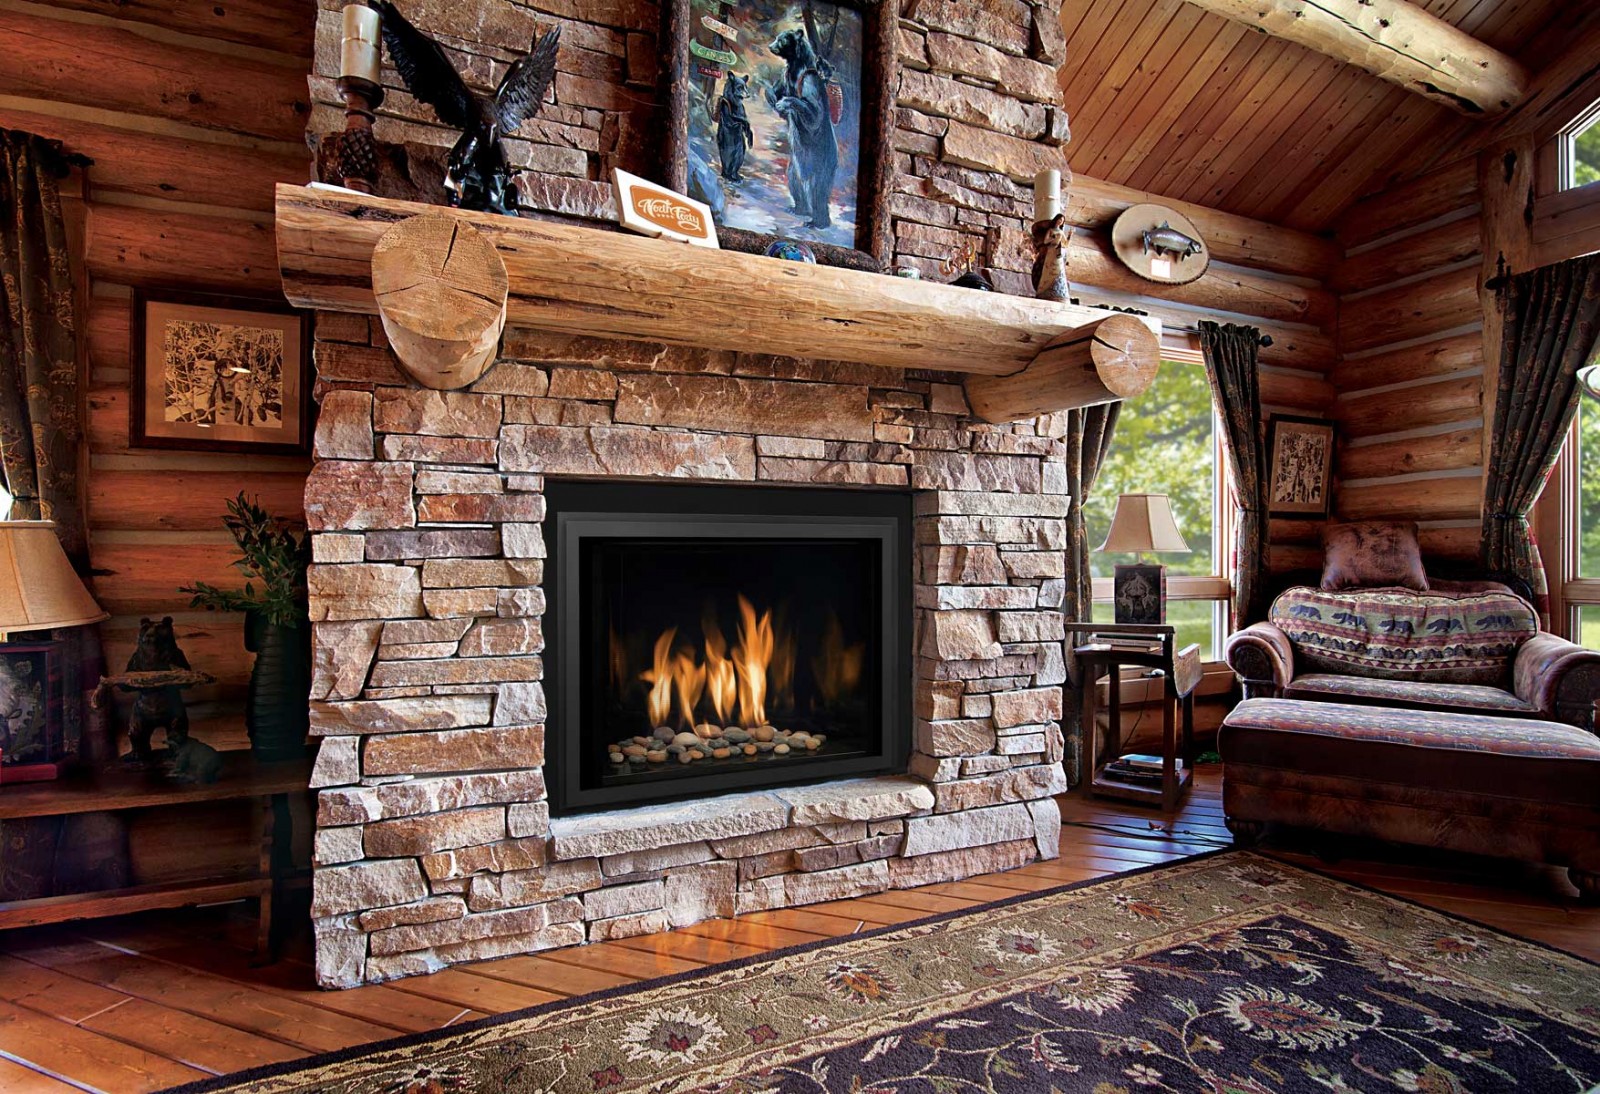 A cozy log cabin with a stylish mantel and a fireplace.